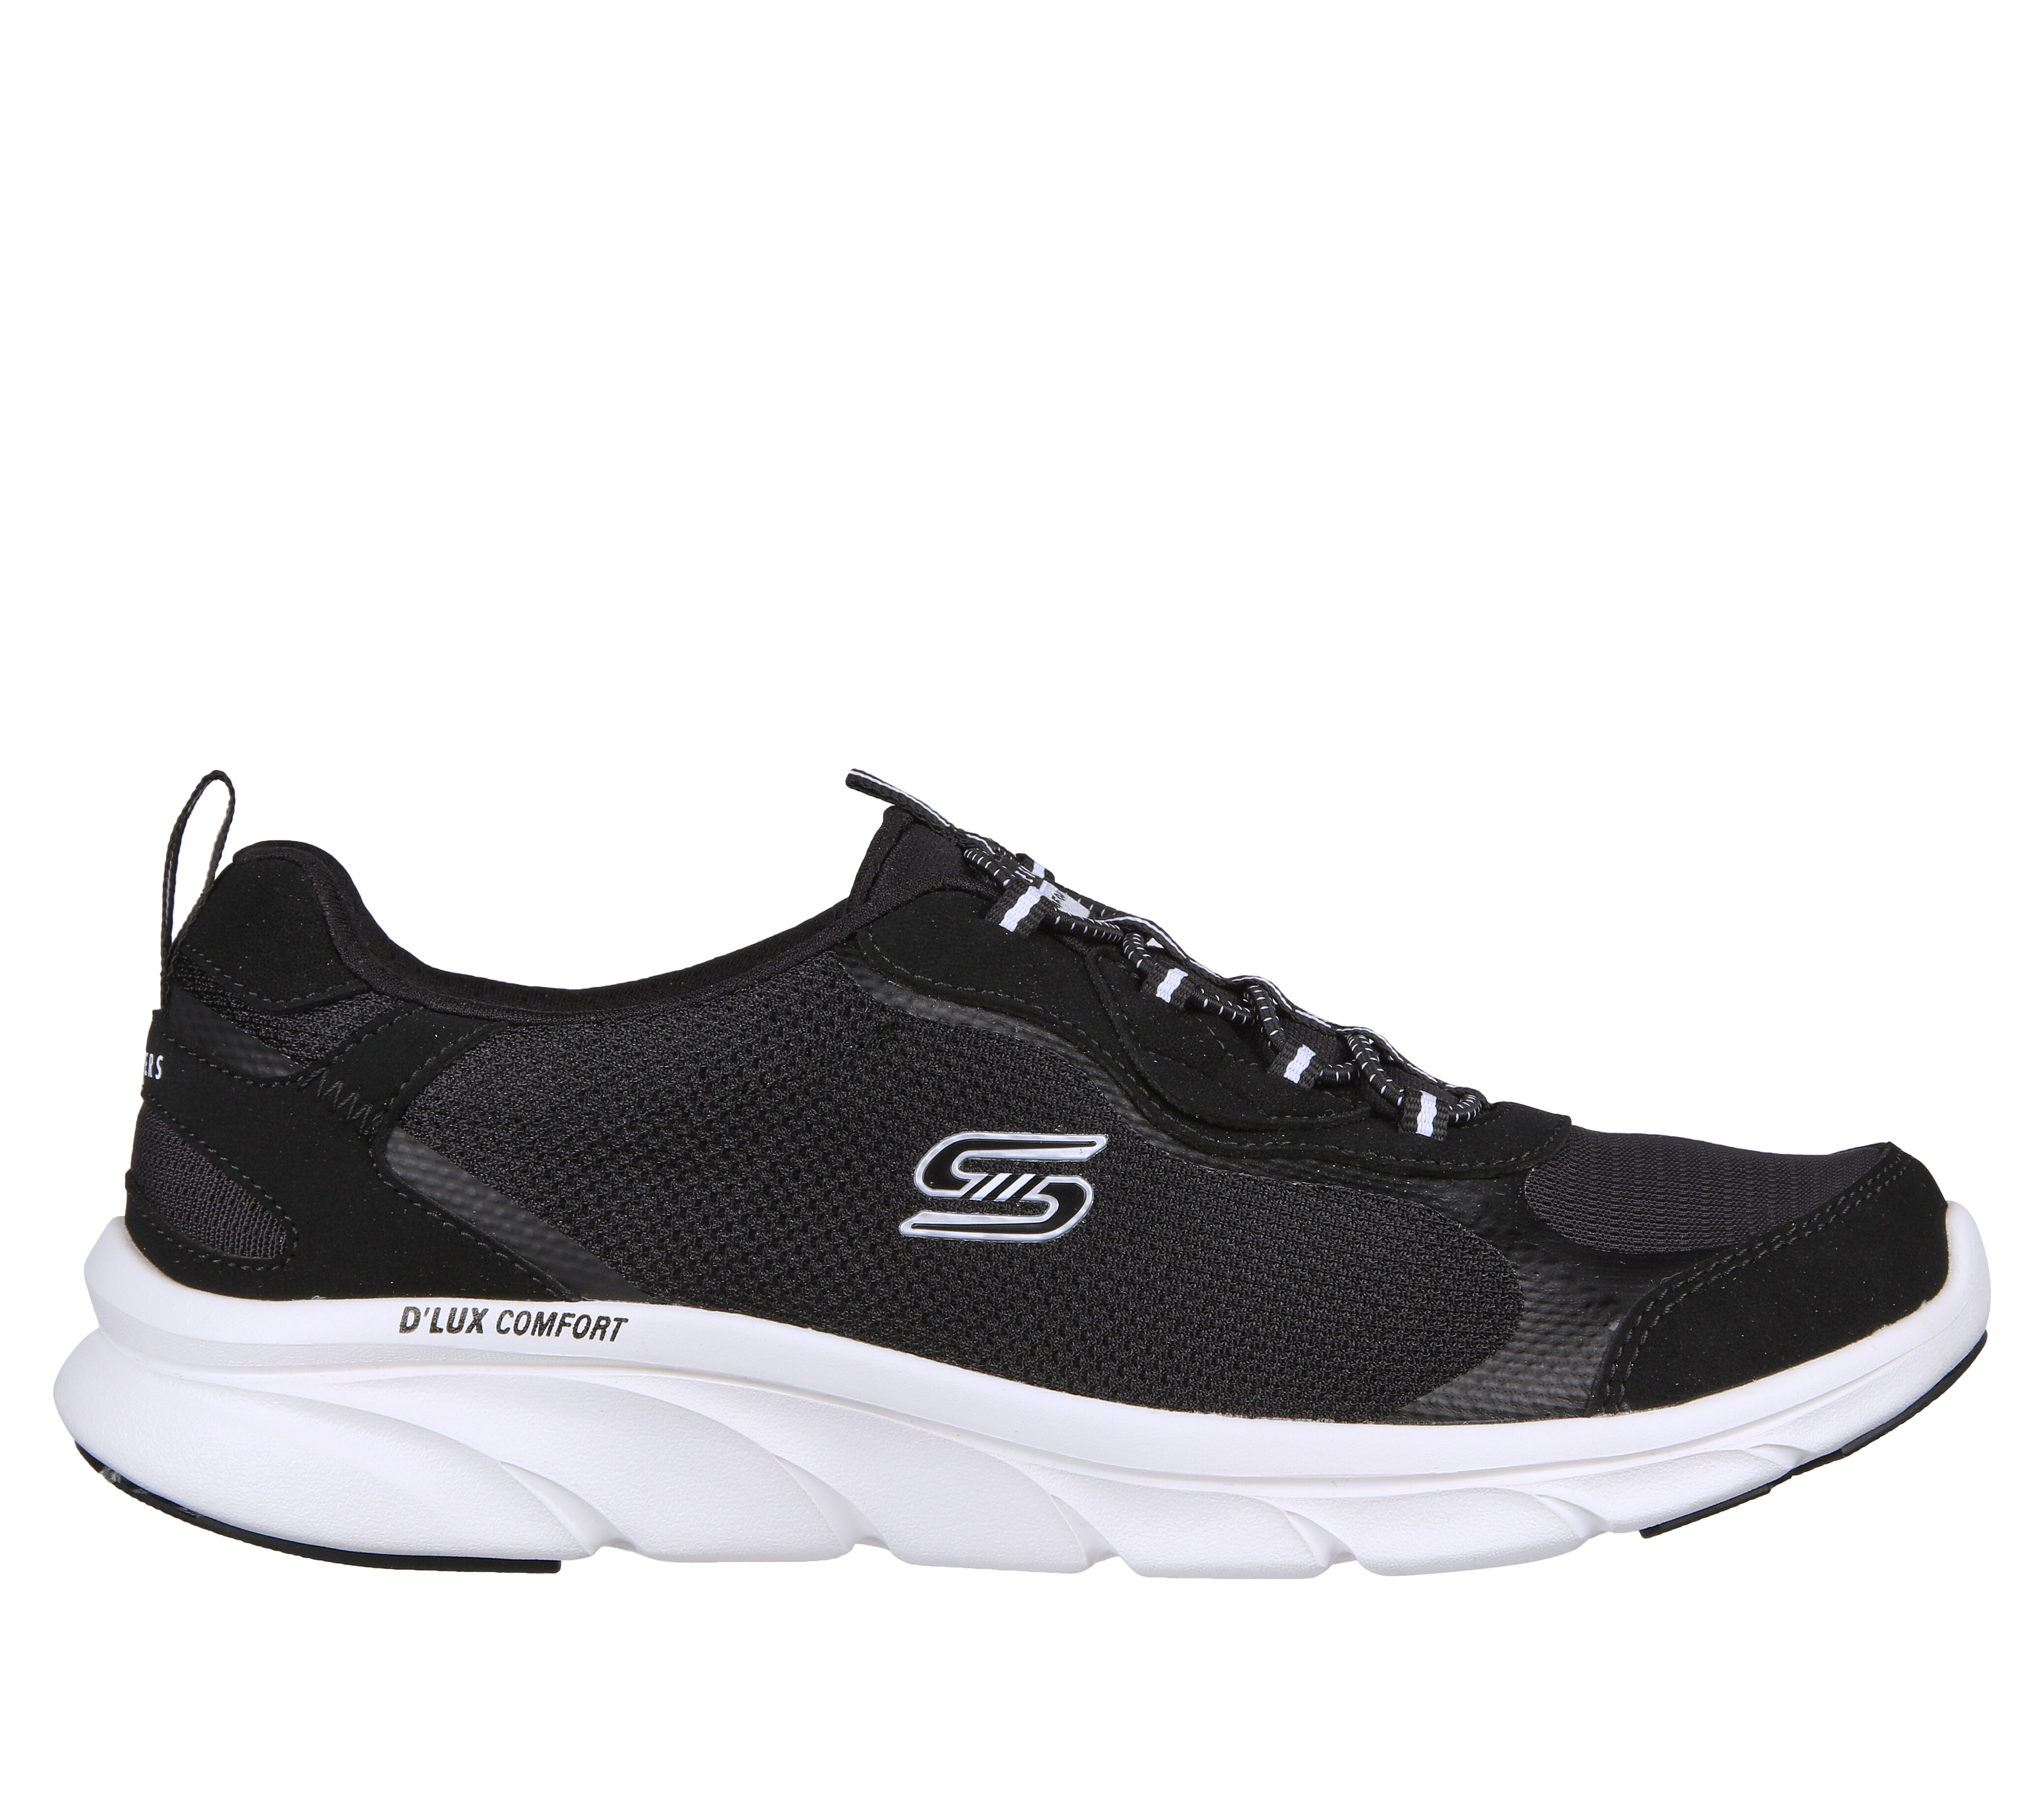 skechers relaxed fit price